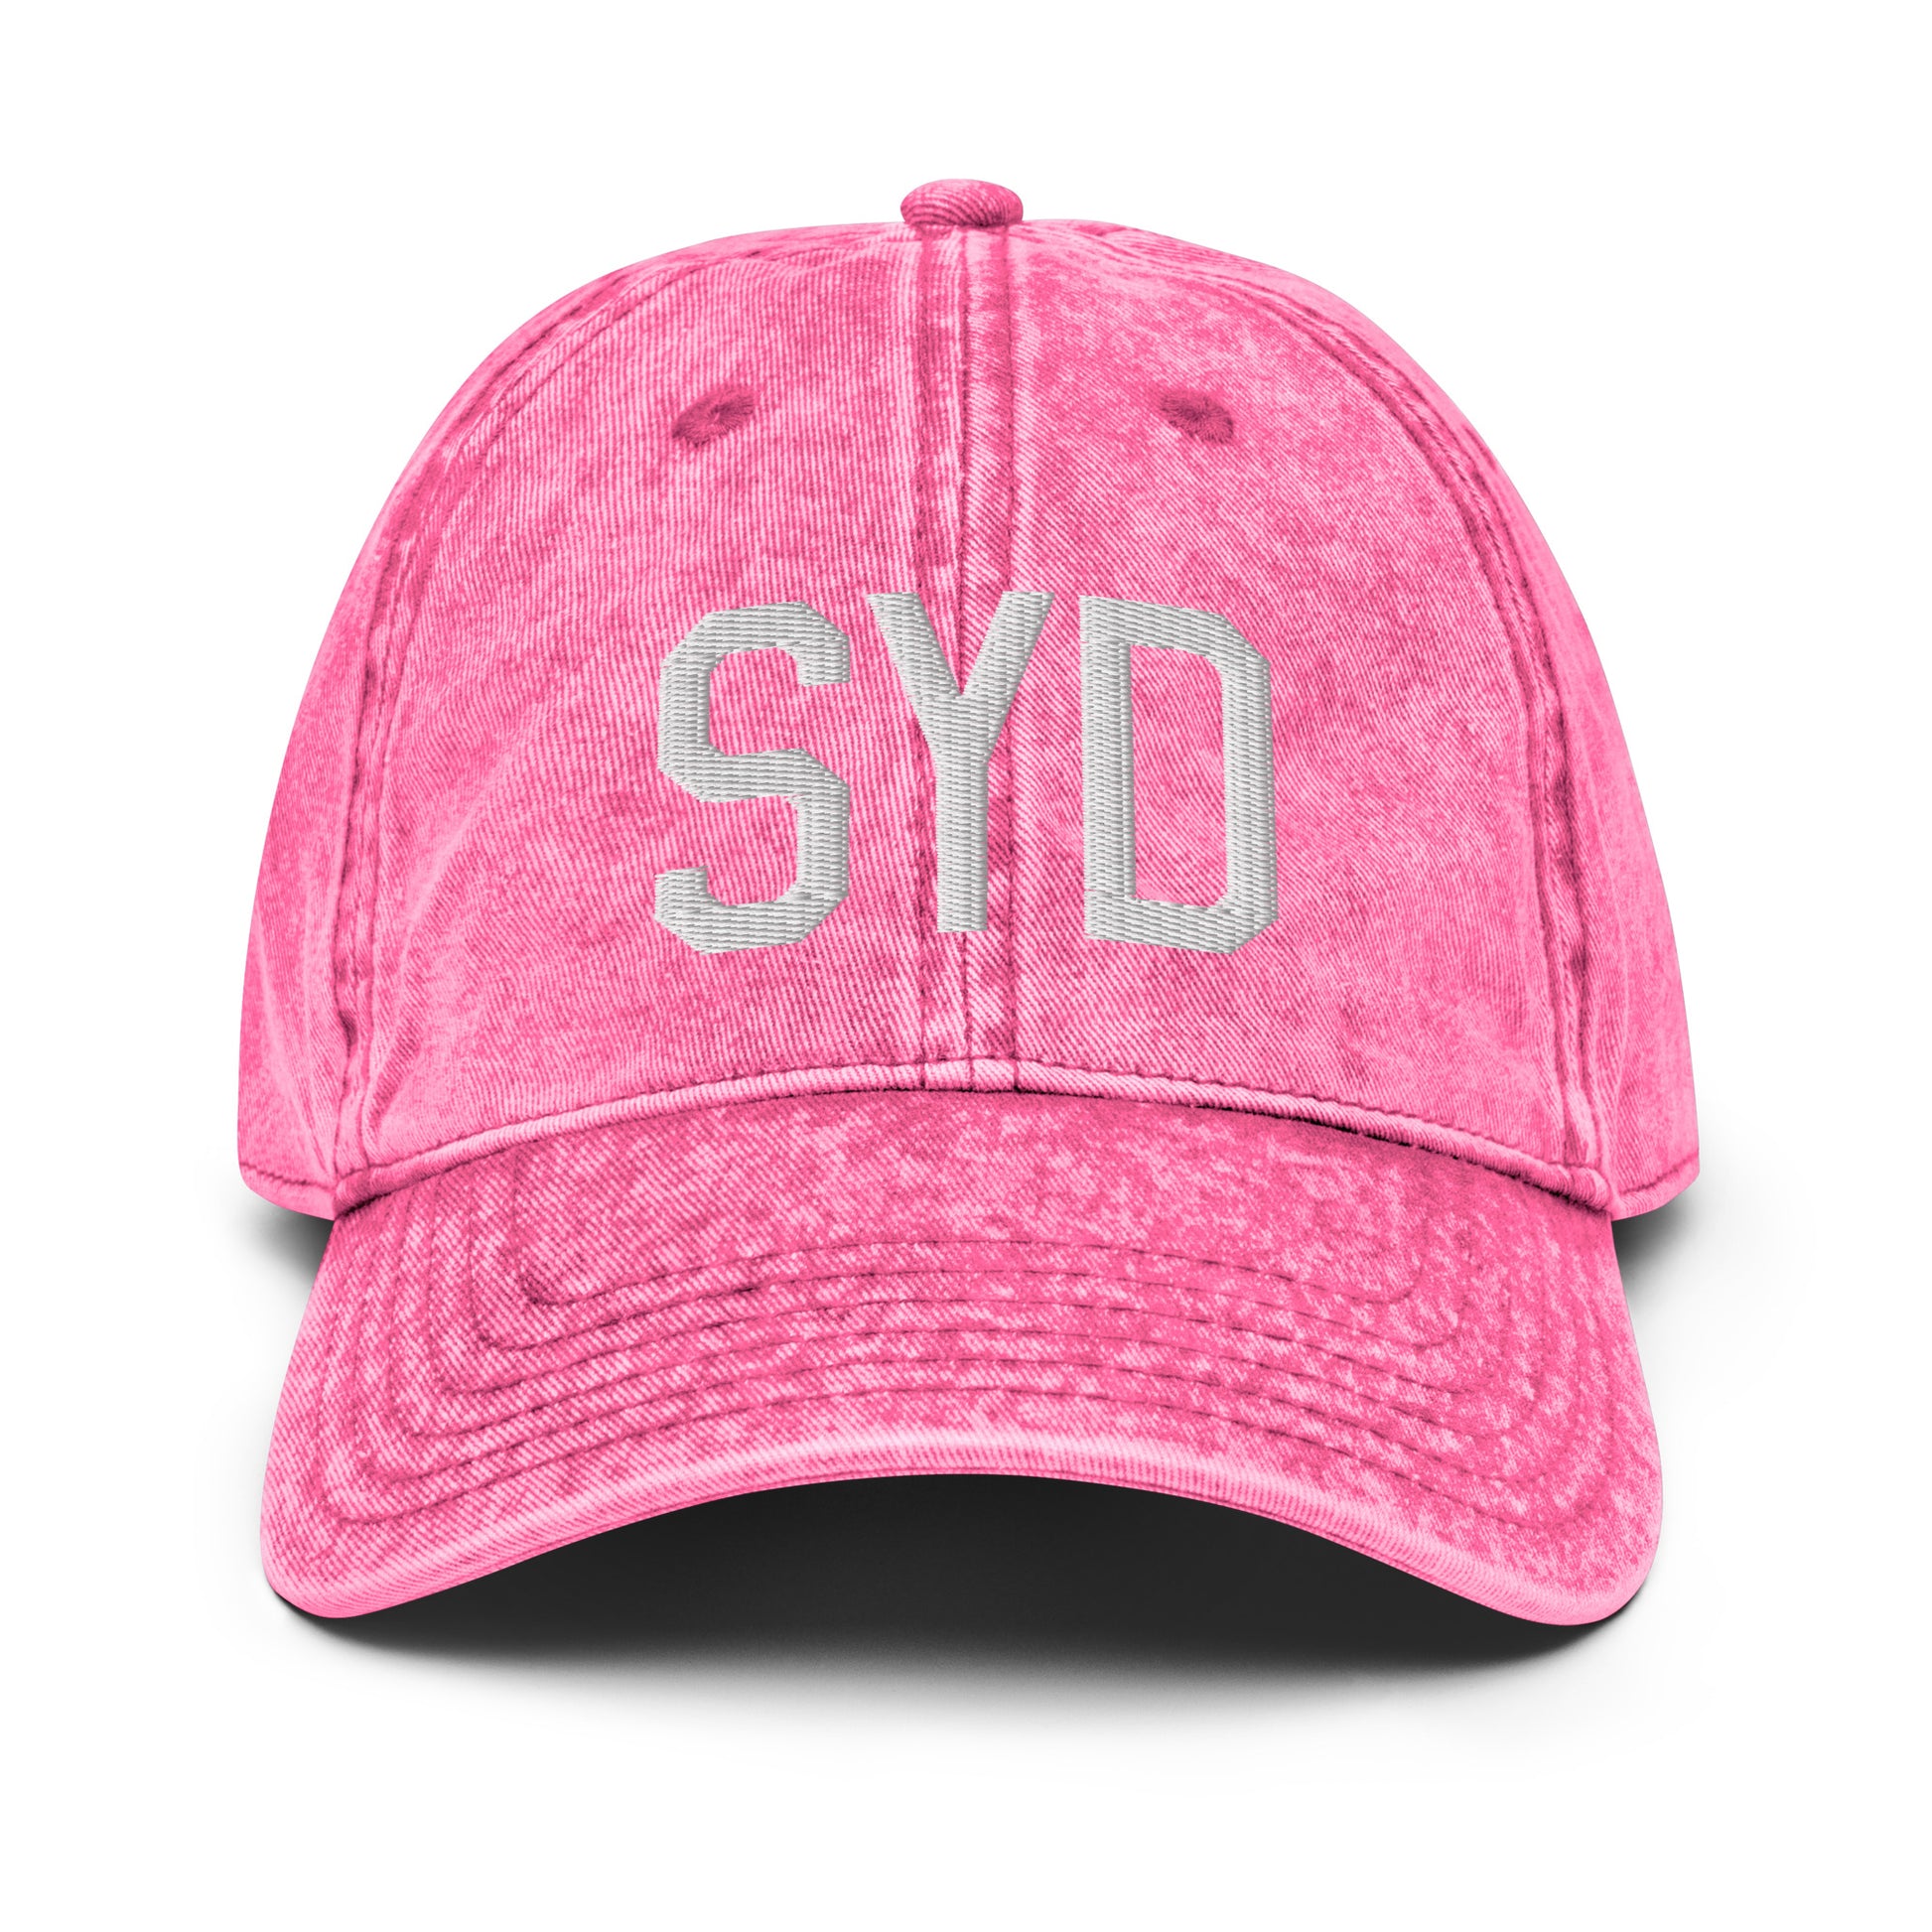 Airport Code Twill Cap - White • SYD Sydney • YHM Designs - Image 25